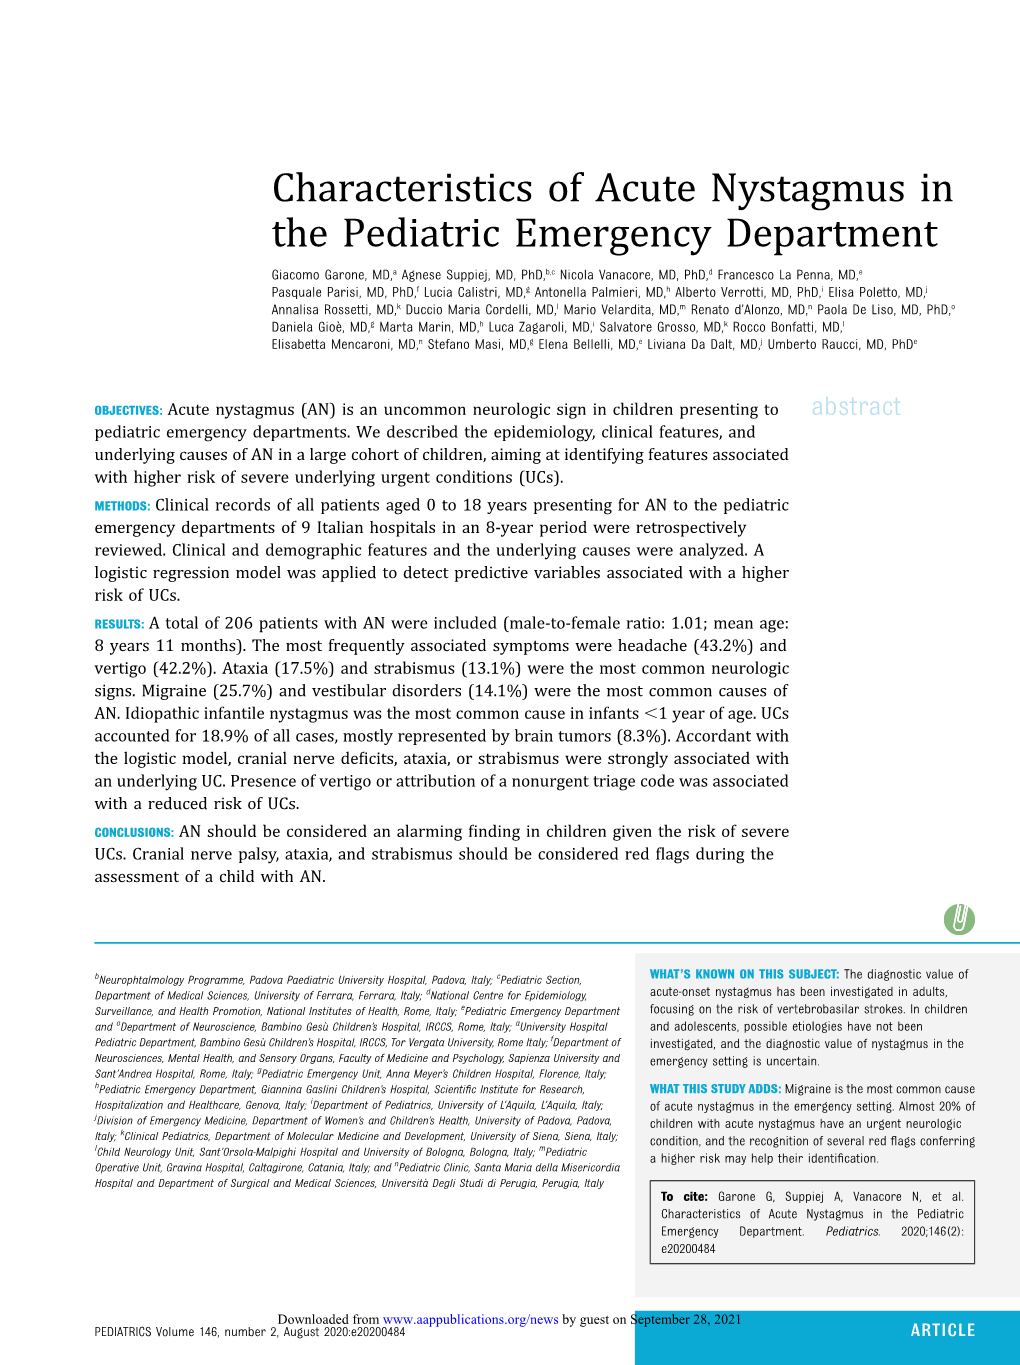 Characteristics of Acute Nystagmus in the Pediatric Emergency Department